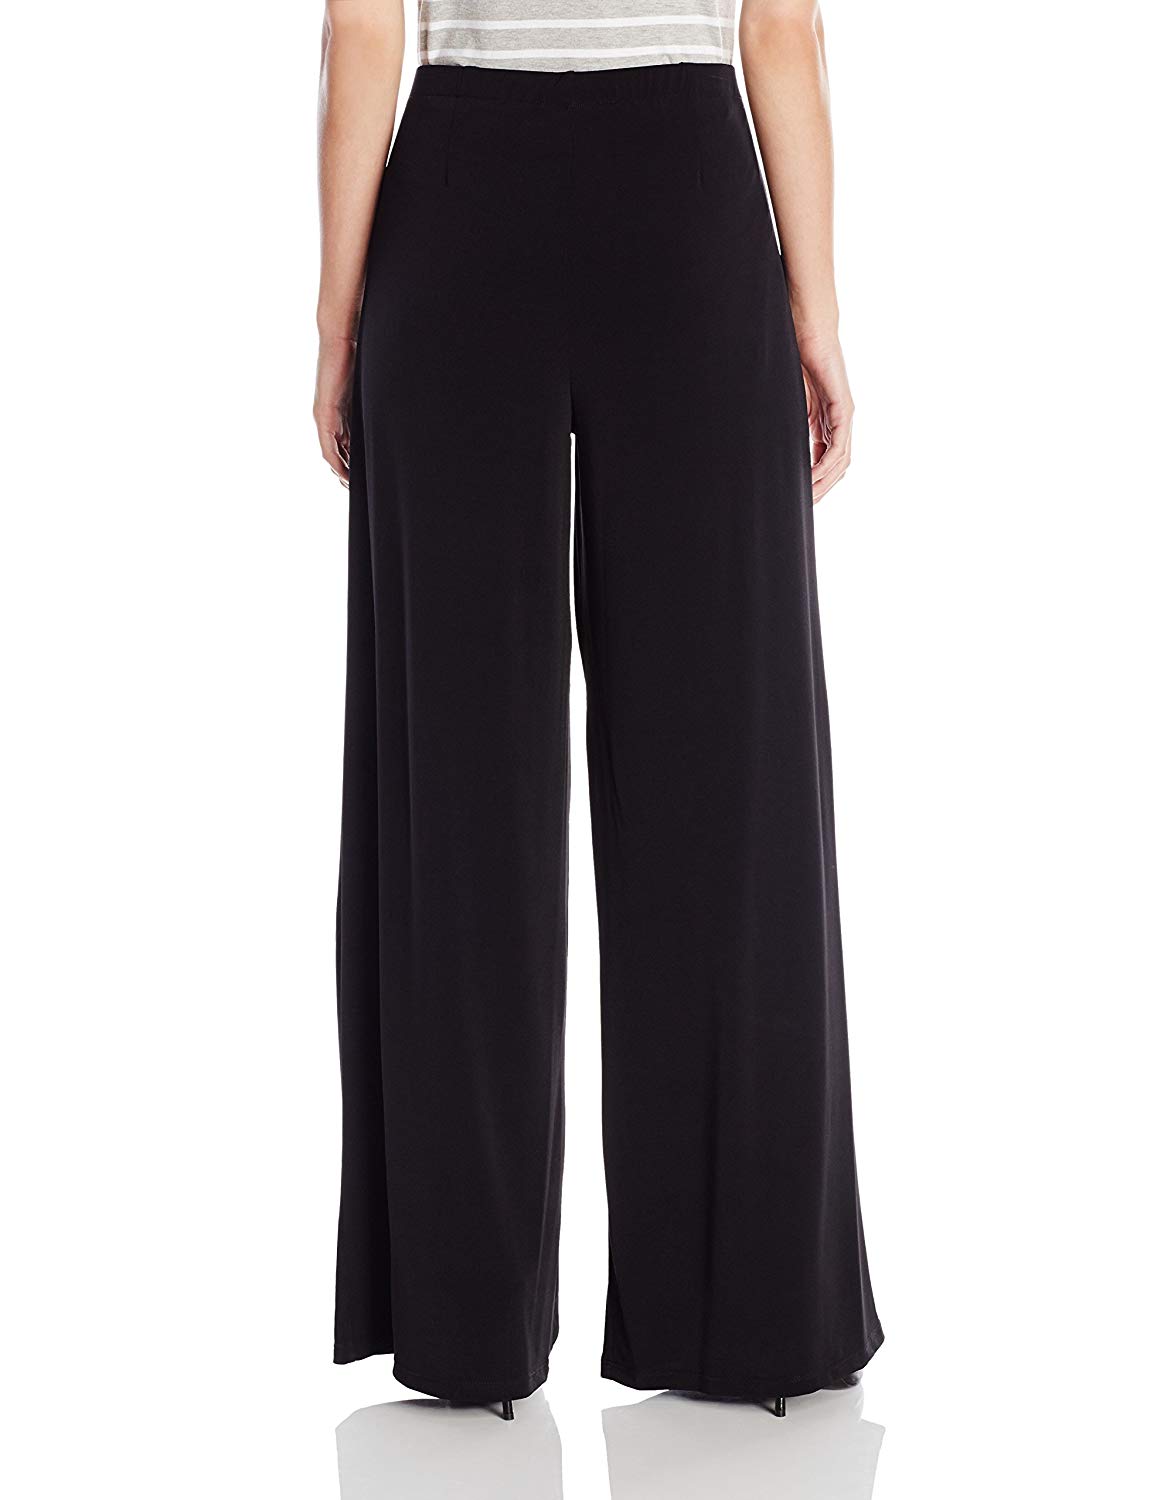 AGB Women's Soft Knit Palazzo Wide Leg Knit Pant,, Everyday Black, Size ...